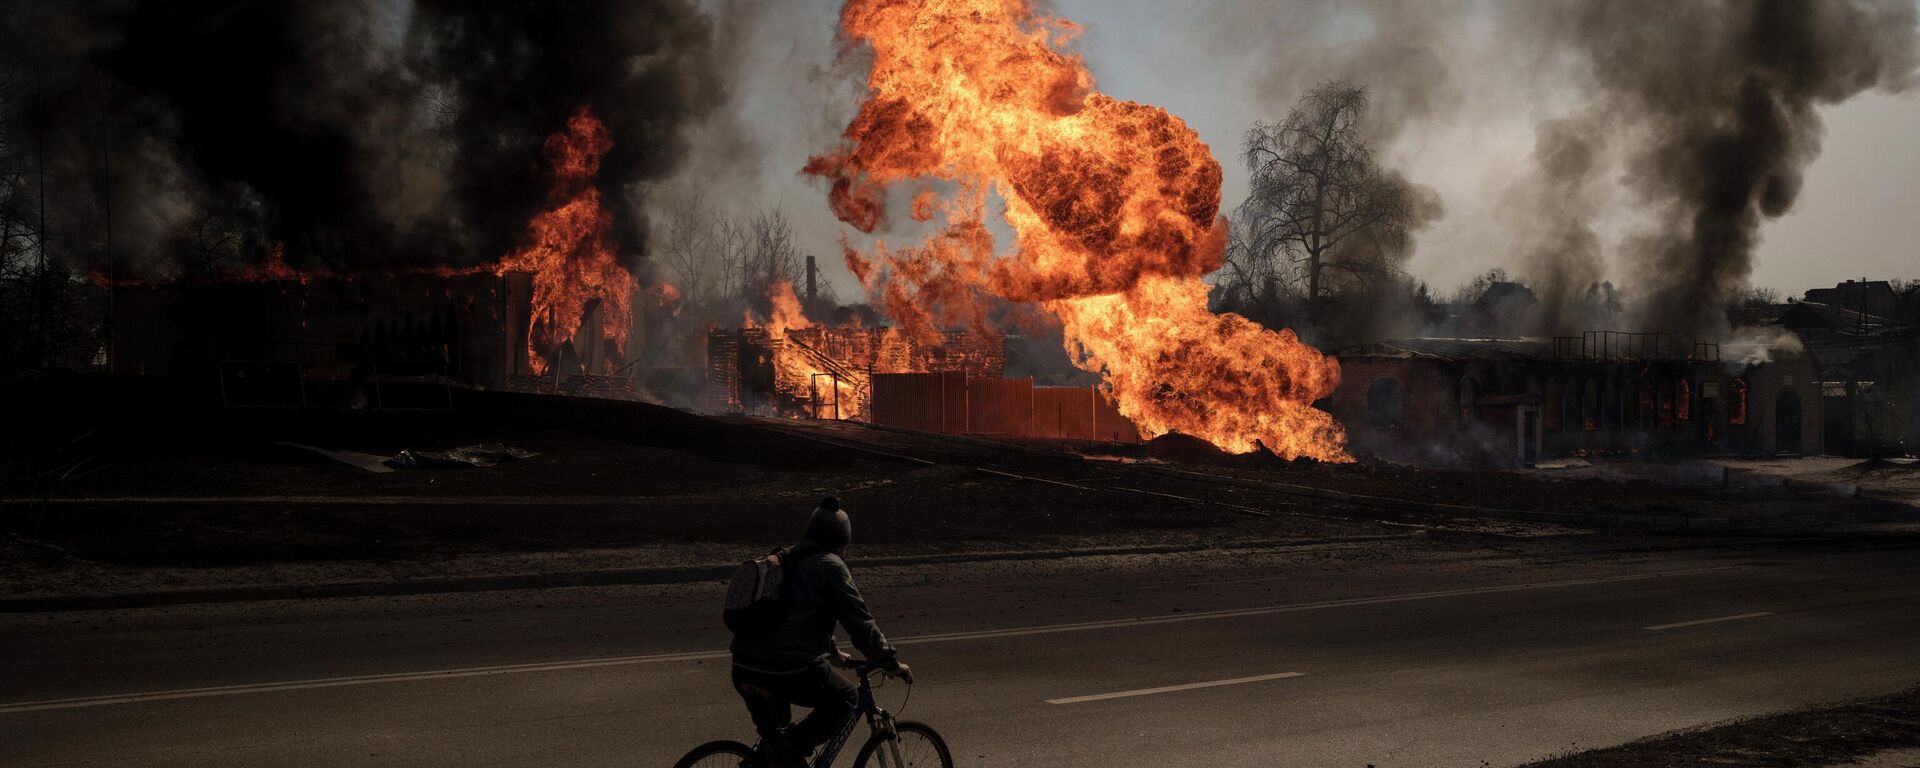 A man rides his bike past flames and smoke rising from a fire following an attack in Kharkiv, Ukraine, Friday, March 25, 2022. - Sputnik International, 1920, 23.08.2022